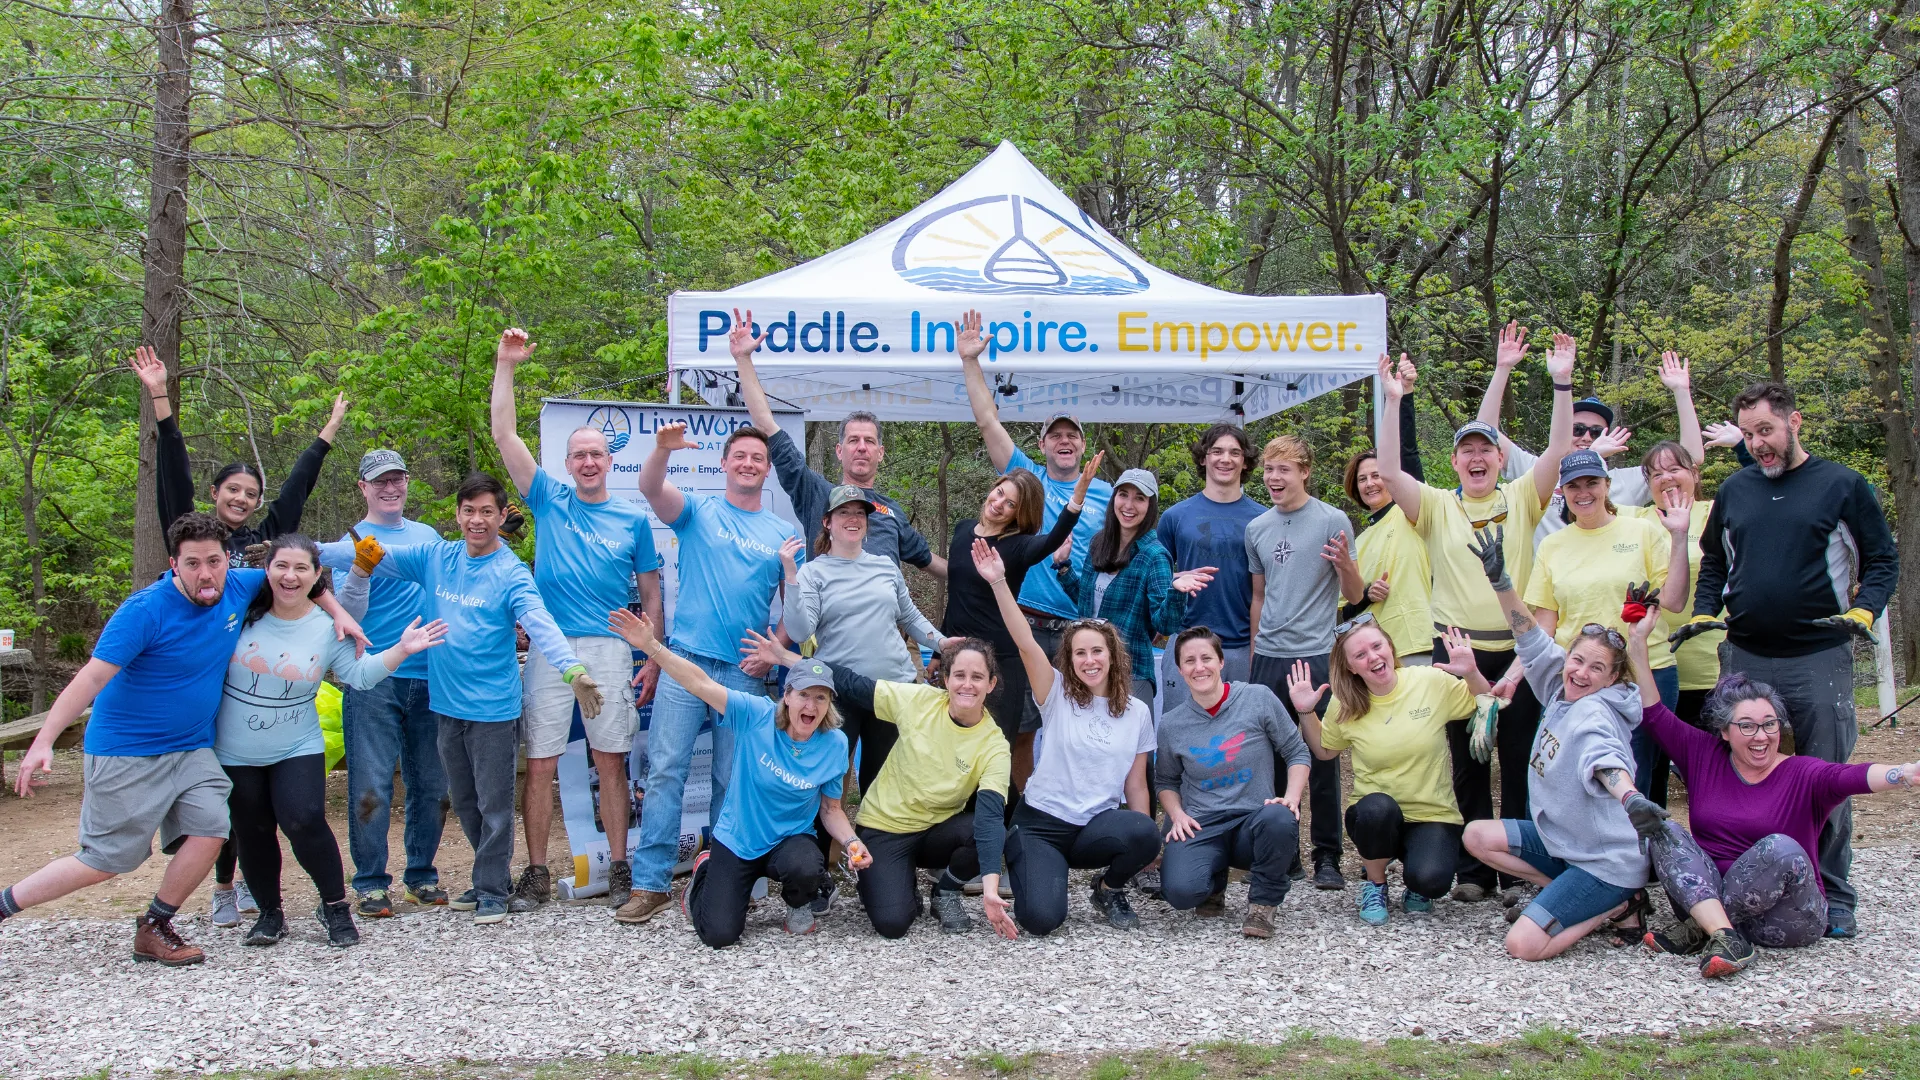 group in front of a canopy with Paddle Inspire Empower and the LWF logo